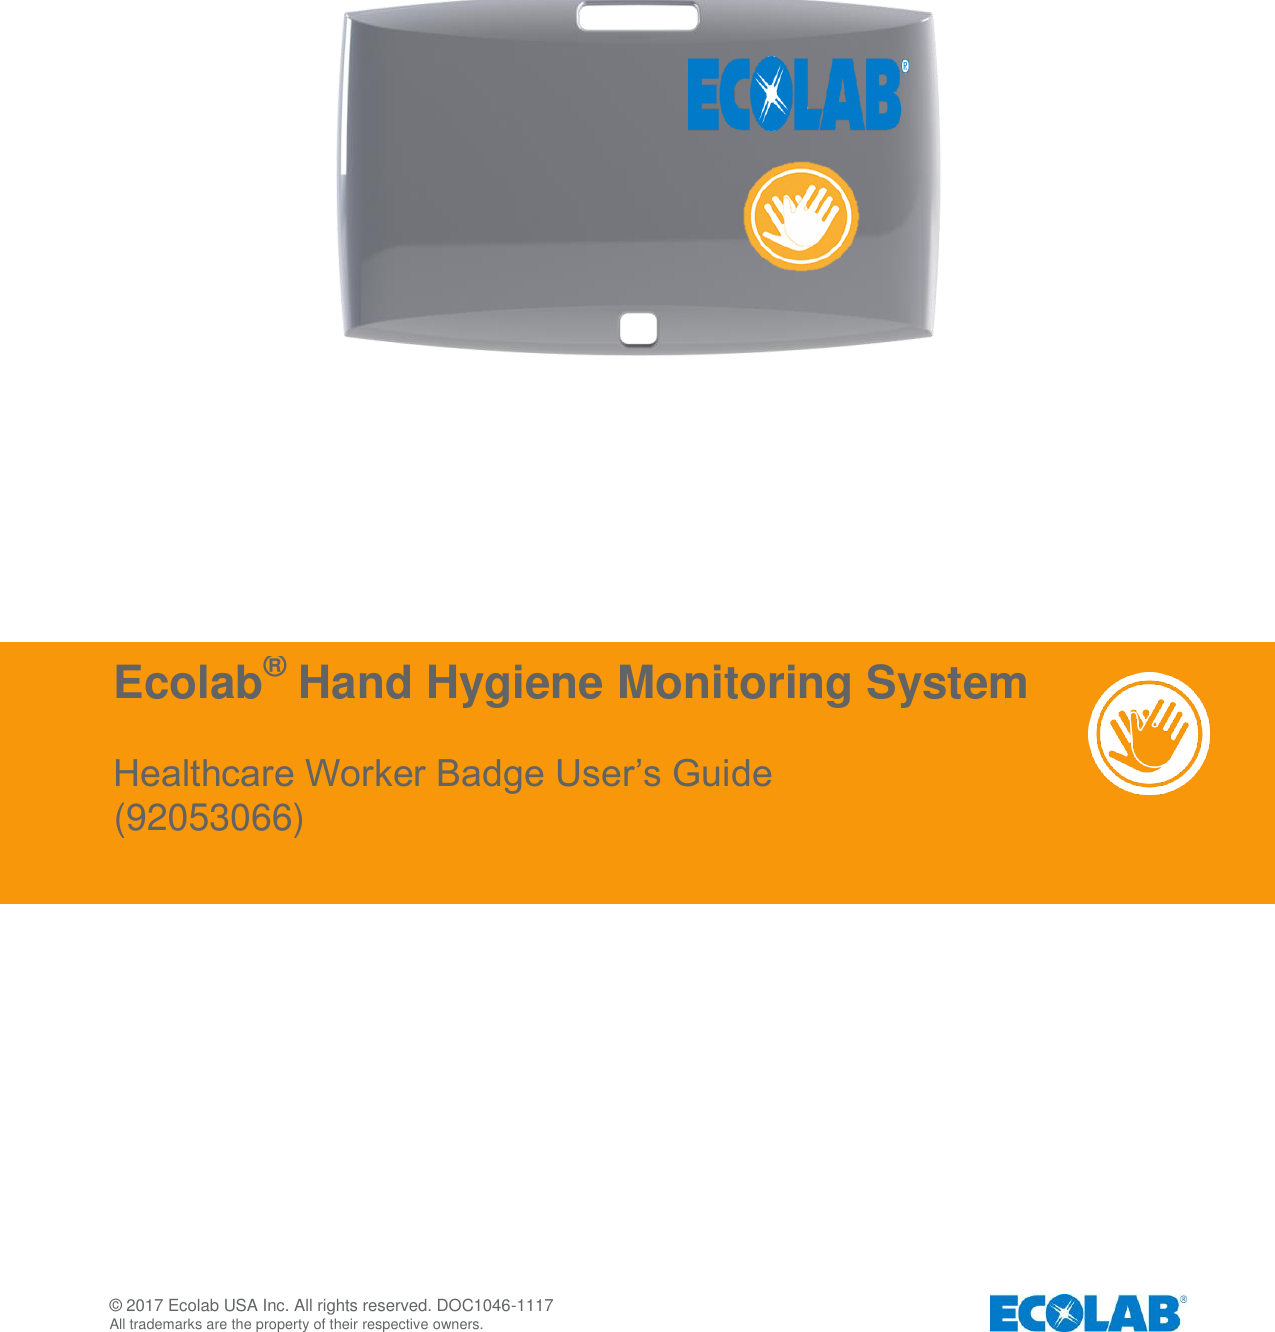   © 2017 Ecolab USA Inc. All rights reserved. DOC1046-1117    All trademarks are the property of their respective owners.                                               Ecolab® Hand Hygiene Monitoring System  Healthcare Worker Badge User’s Guide (92053066) 